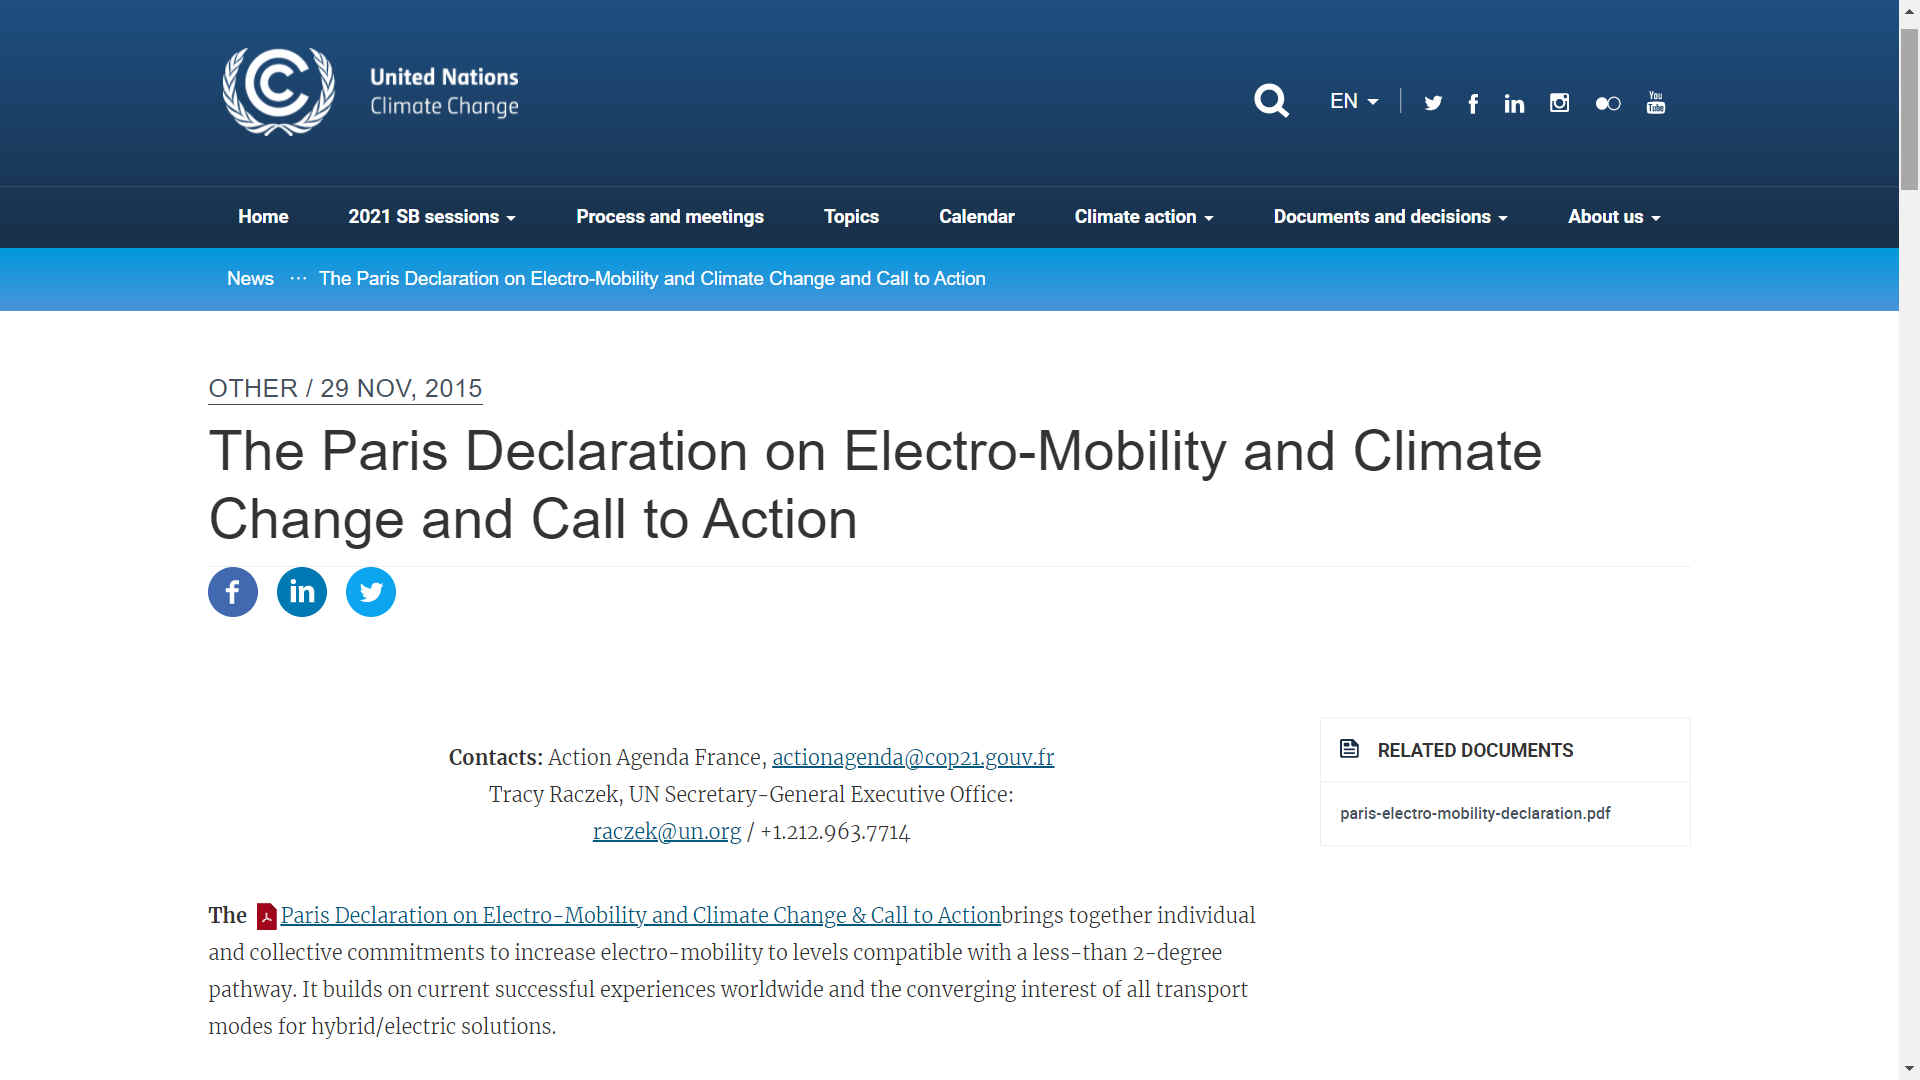 The Paris Declaration on Electro-Mobility and Climate Call to Action